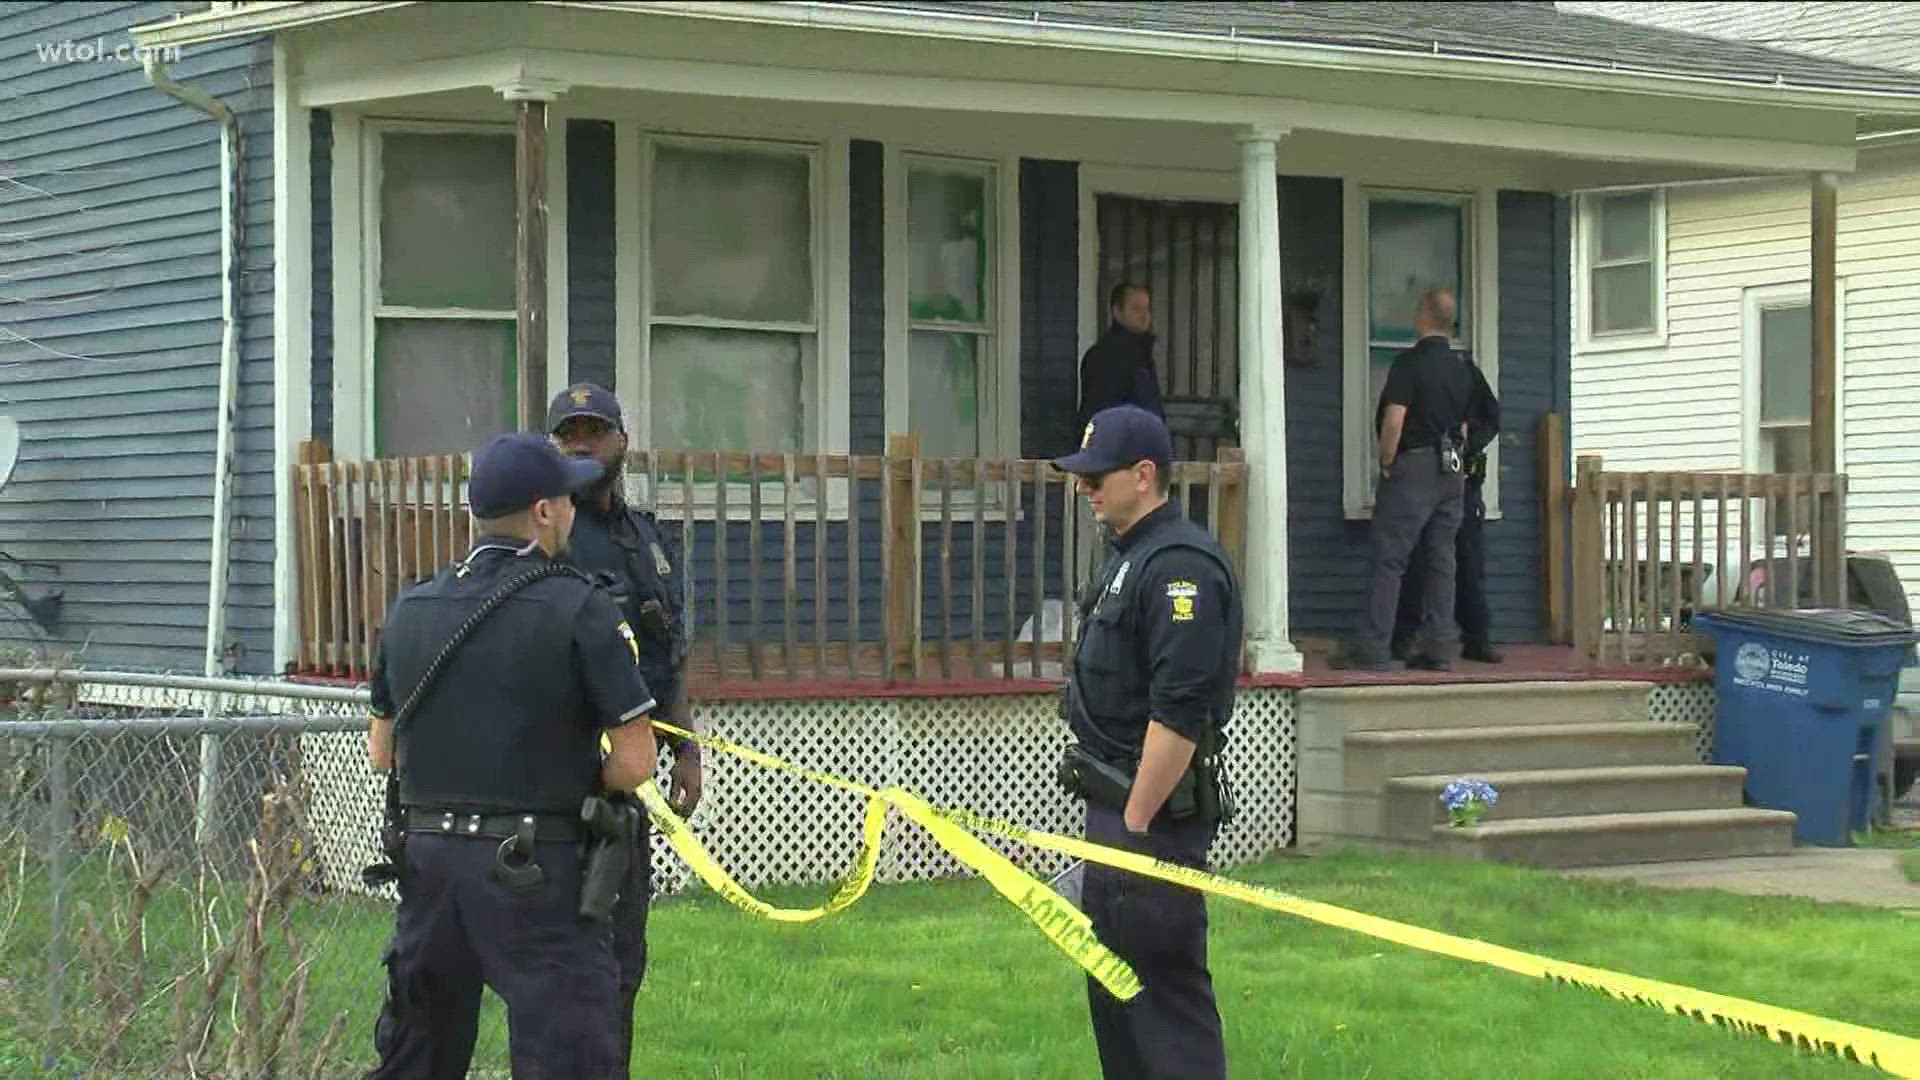 Police say the man's family was worried about him and discovered his body at the home.